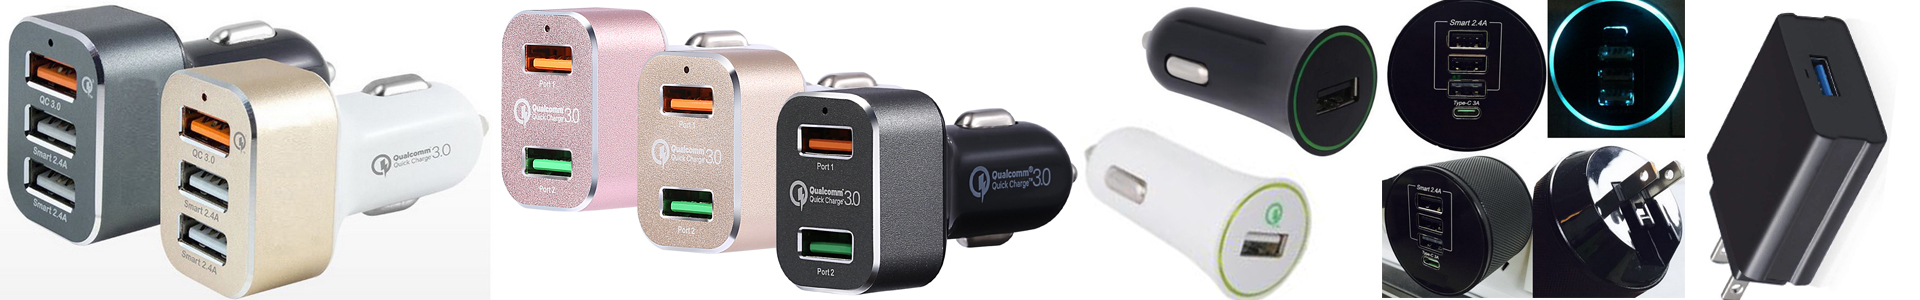 (Qualcomm Certified)QC 3.0 USB Charger